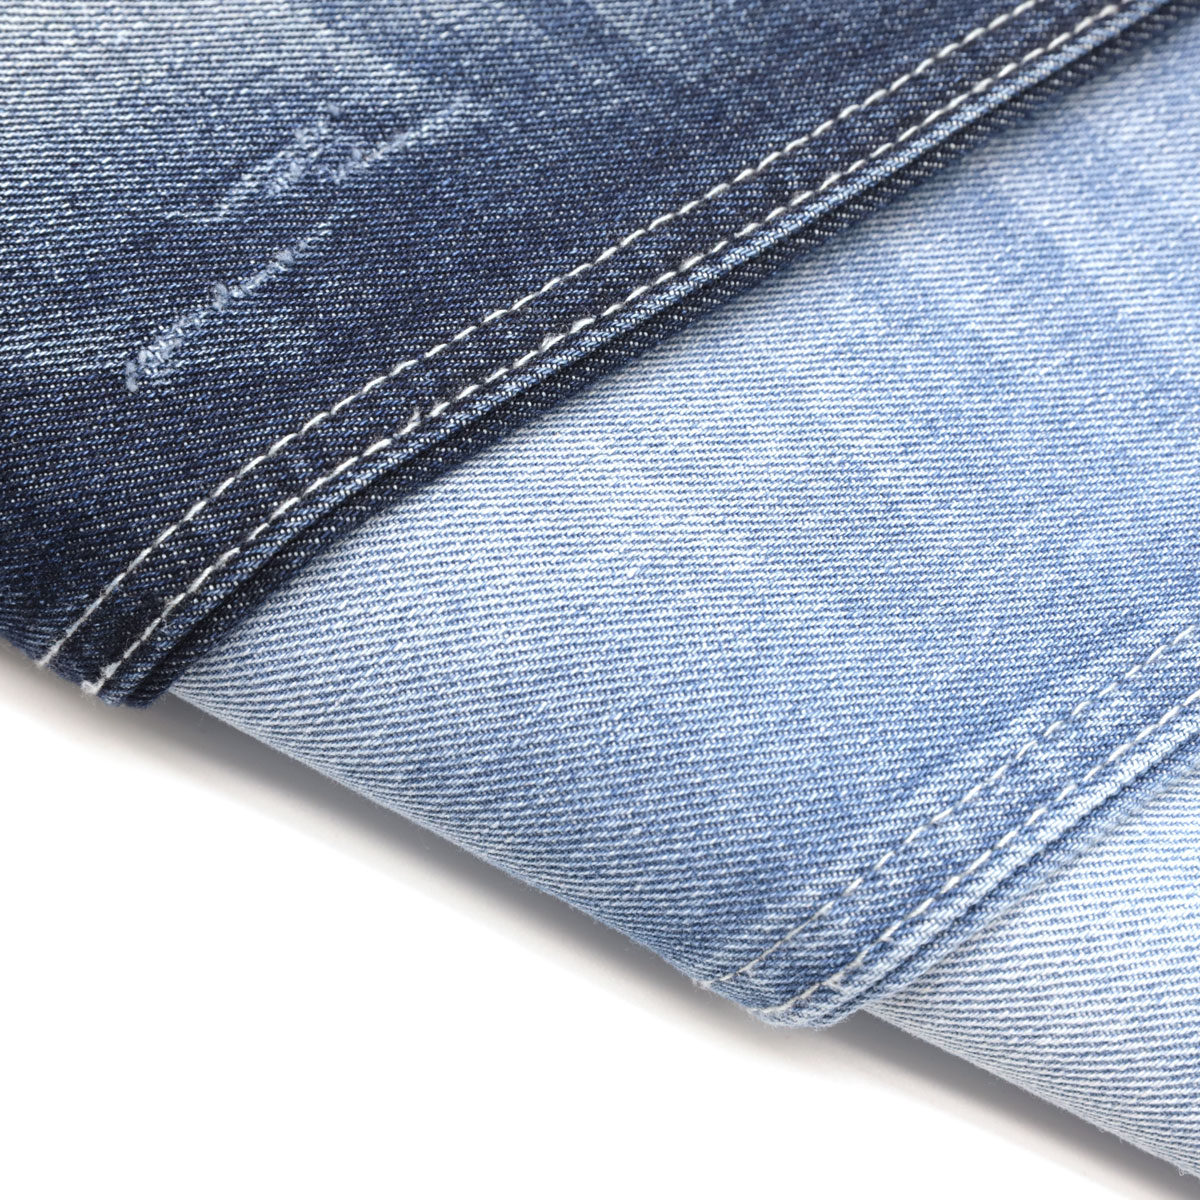 Manufacturing Technology and Quality of Denim Fabric 1